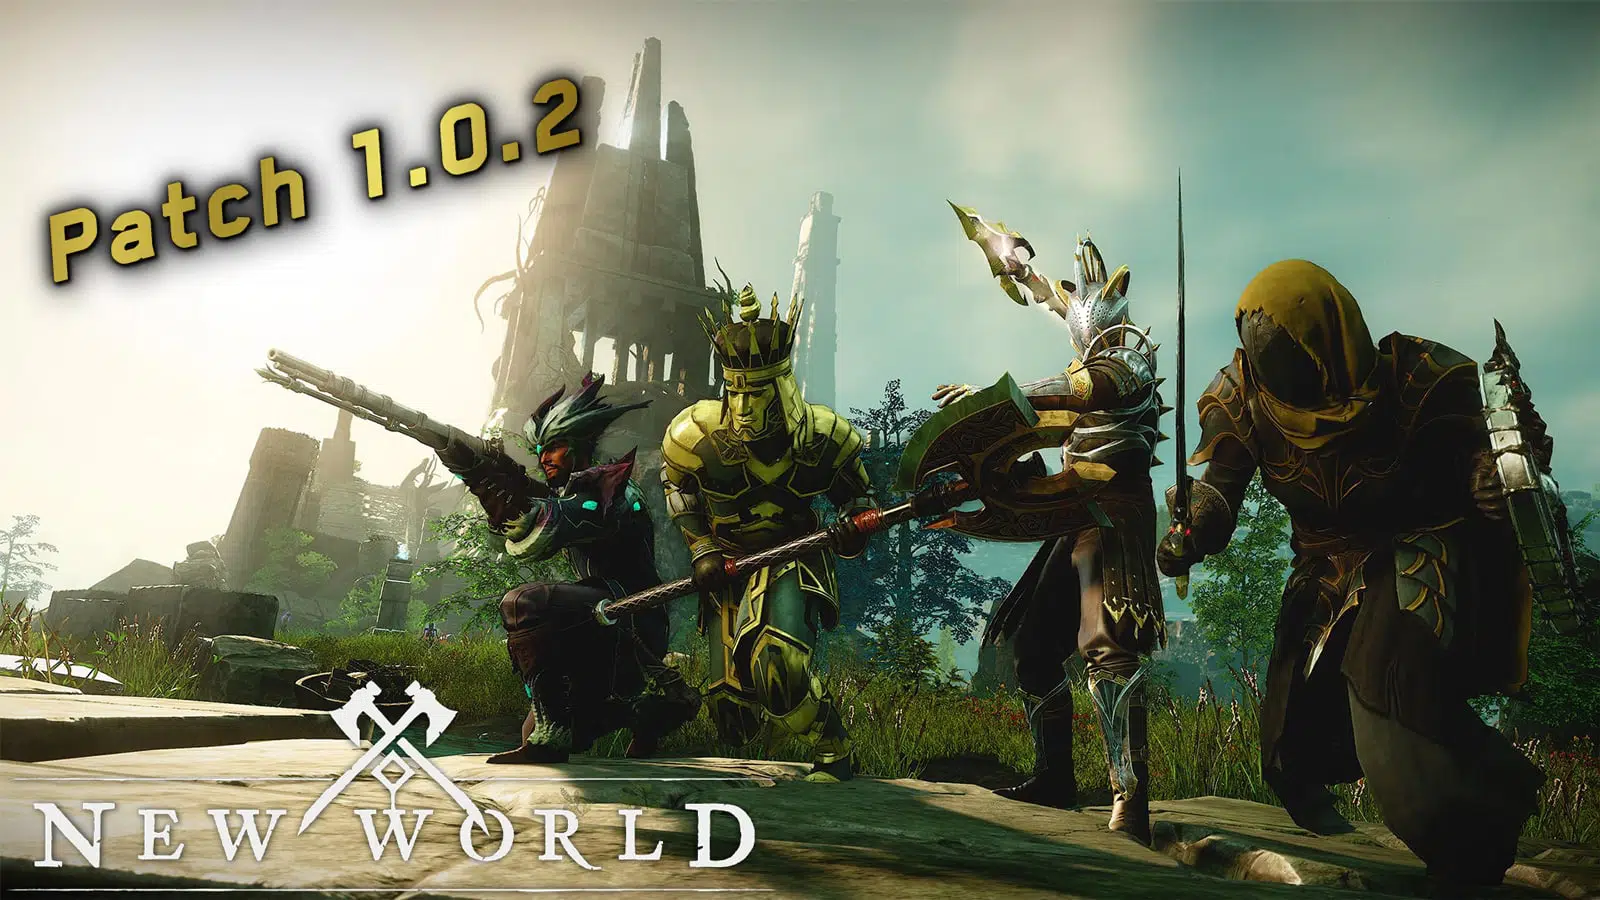 New World Patch 1.0.2